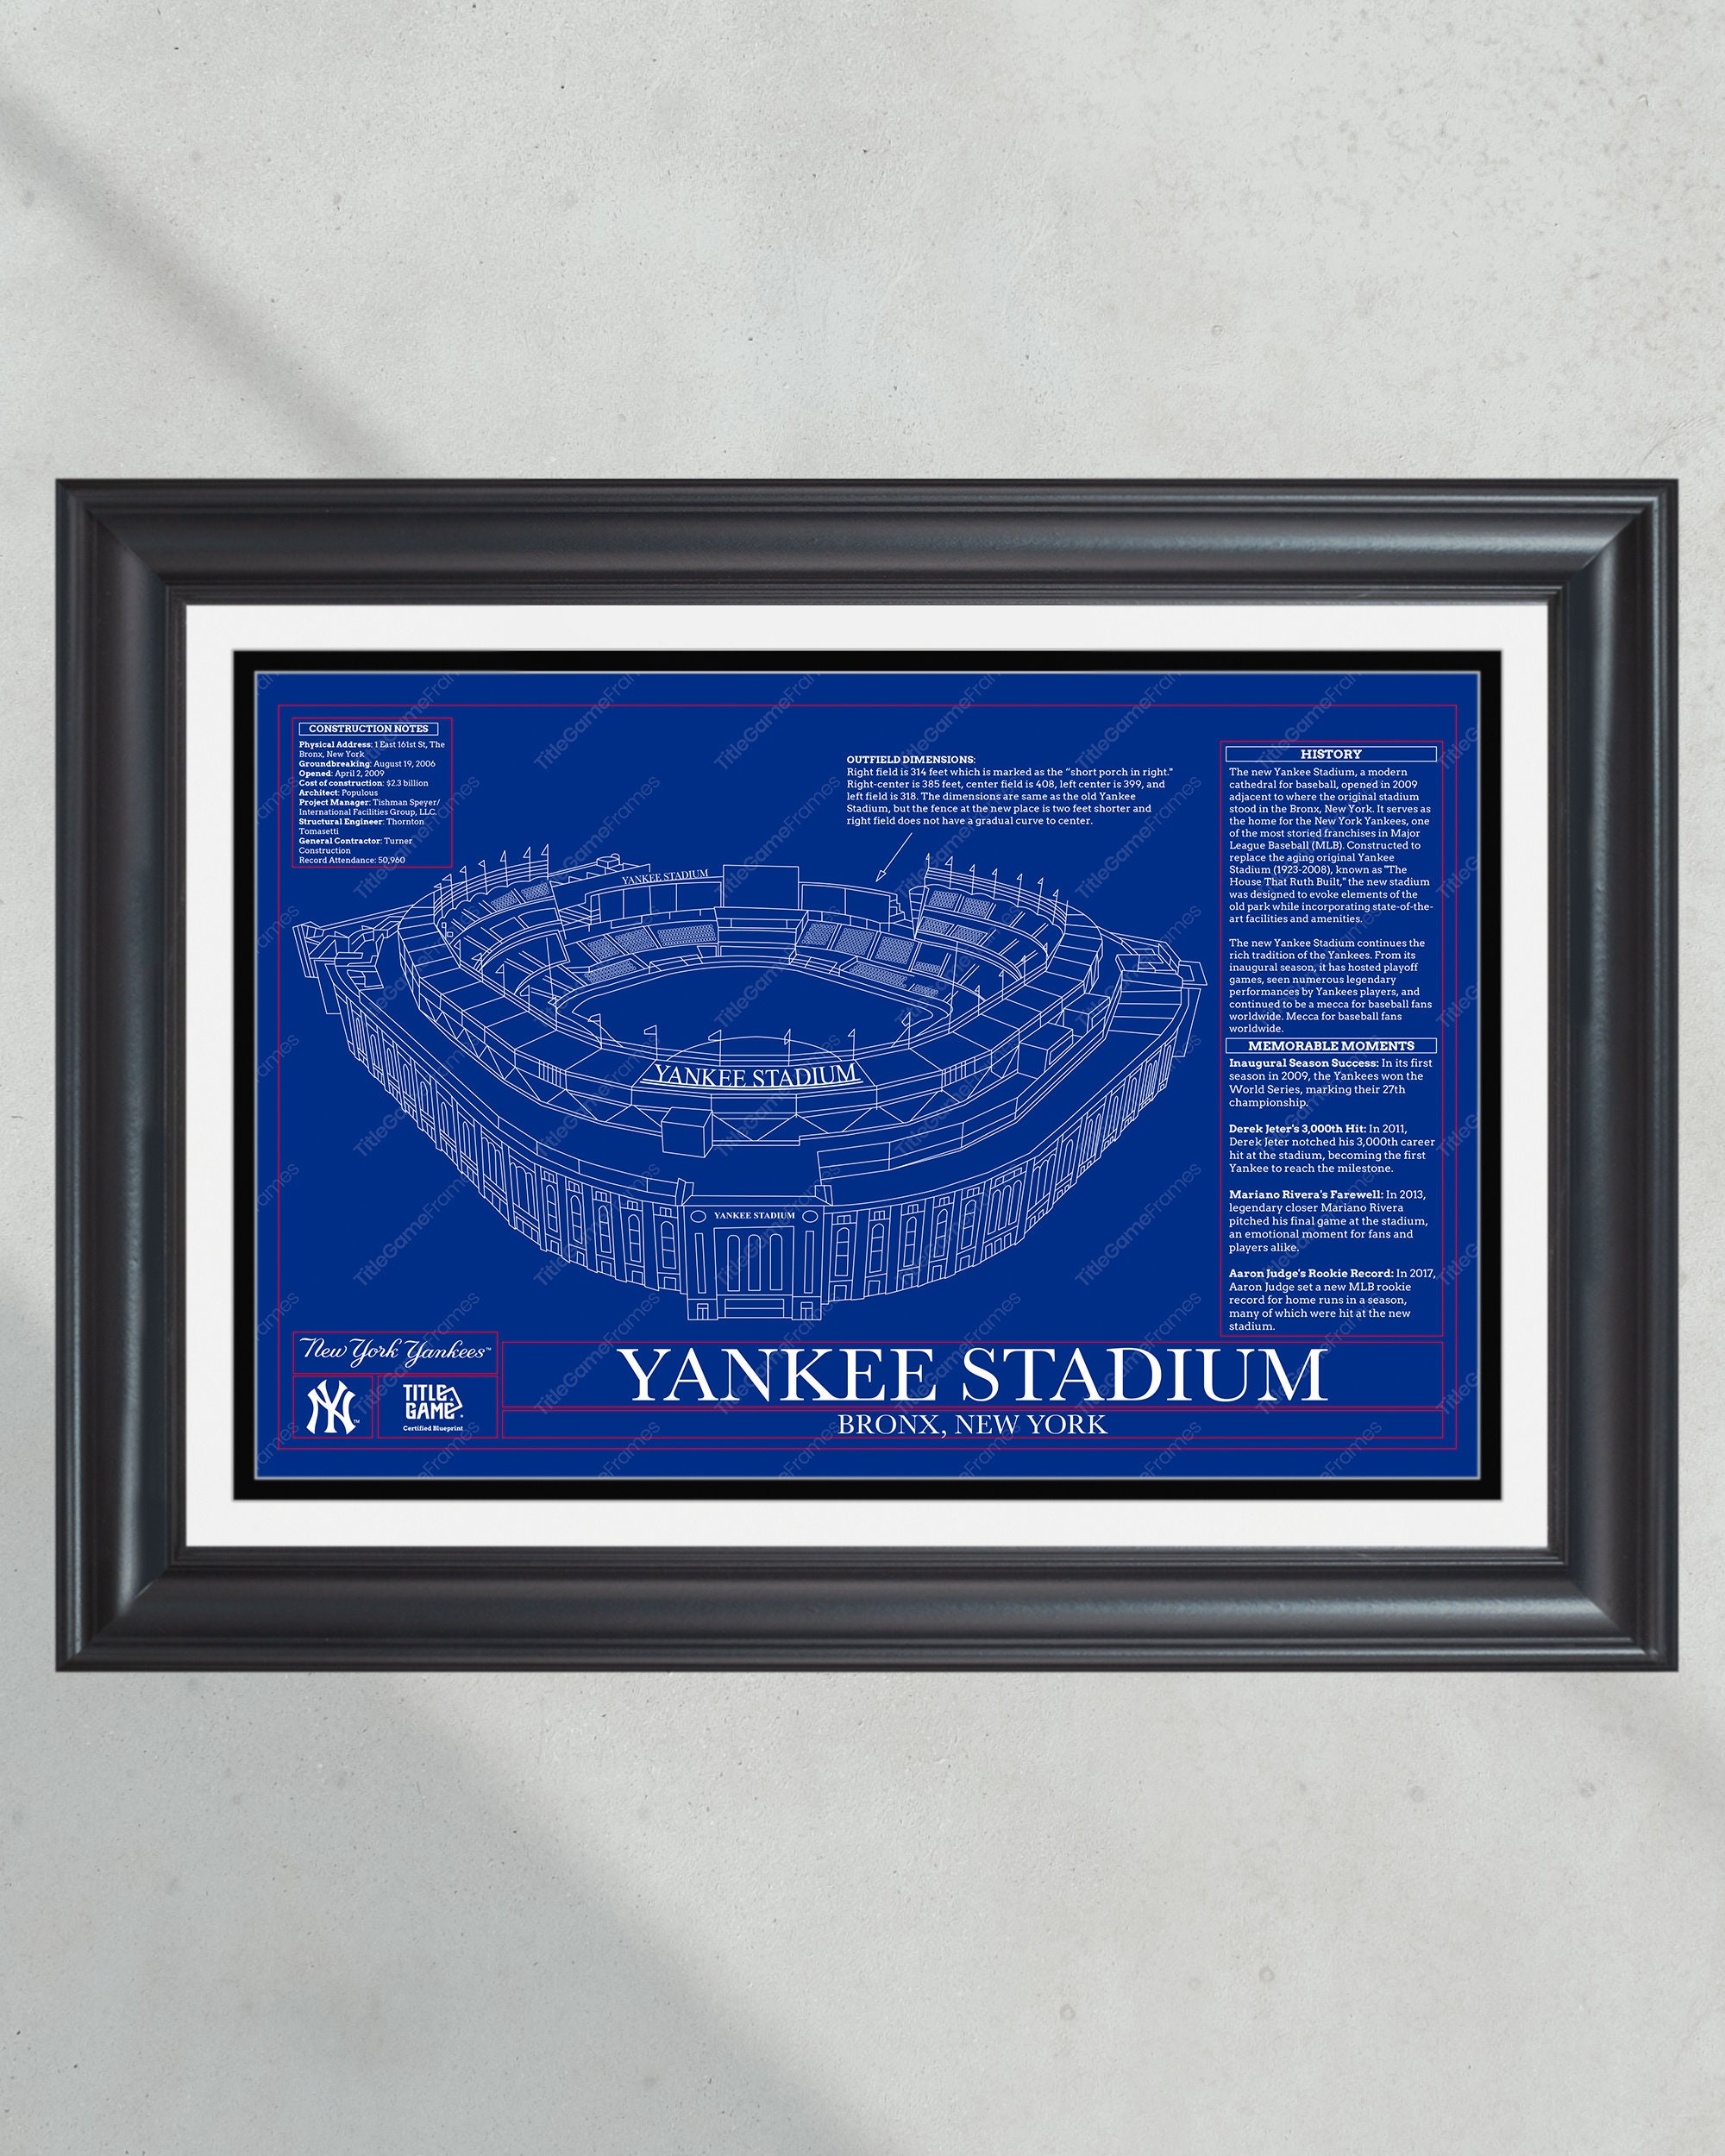 Yankees Tumbler: Sip in Style with Stainless Steel - Pullama